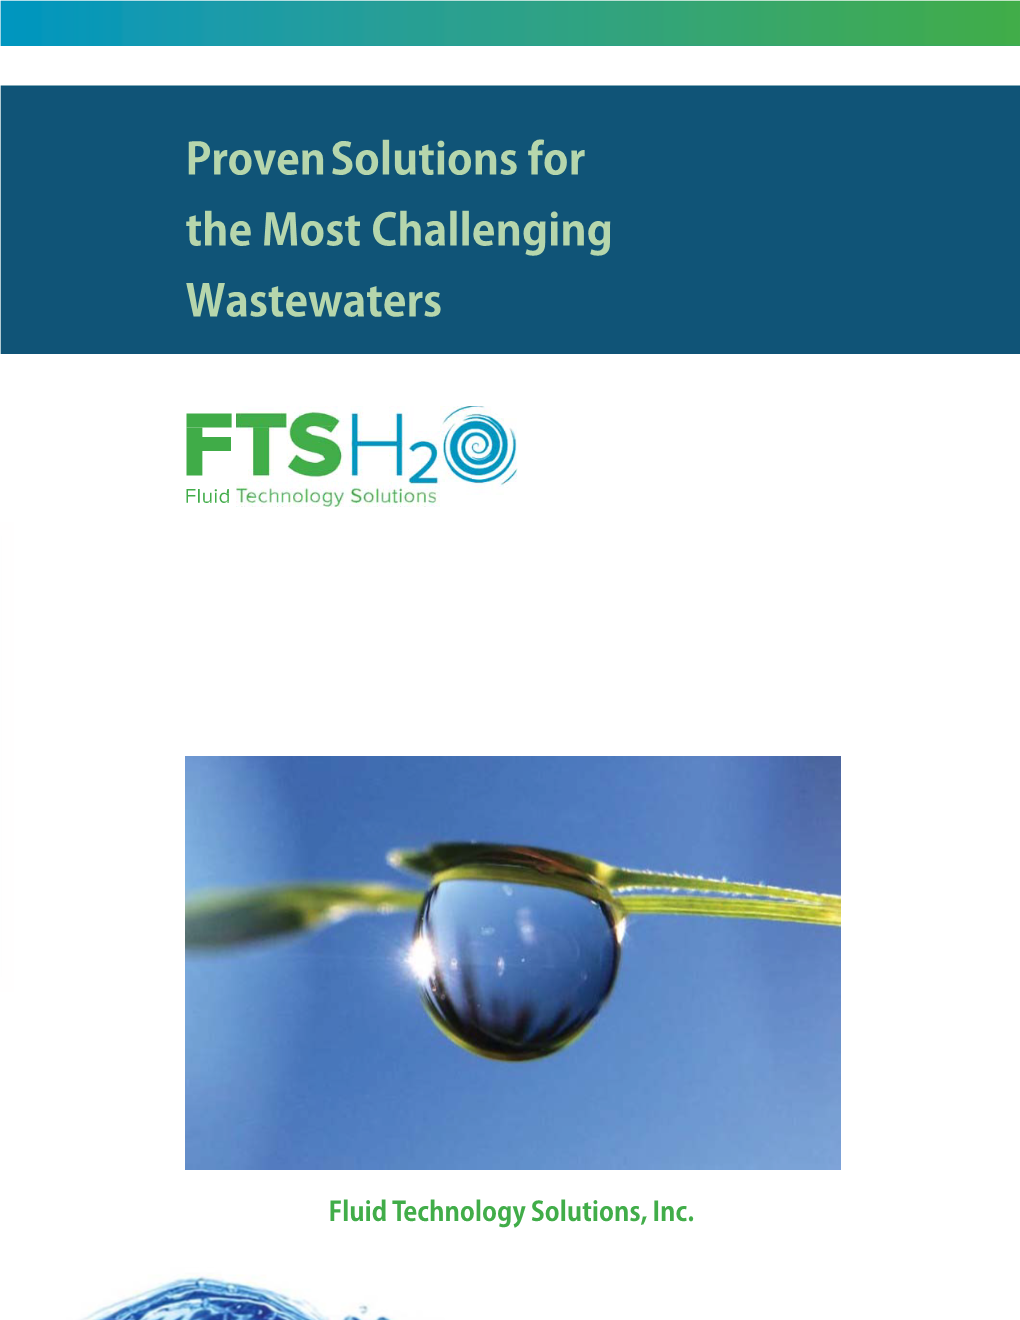 Proven Solutions for the Most Challenging Wastewaters